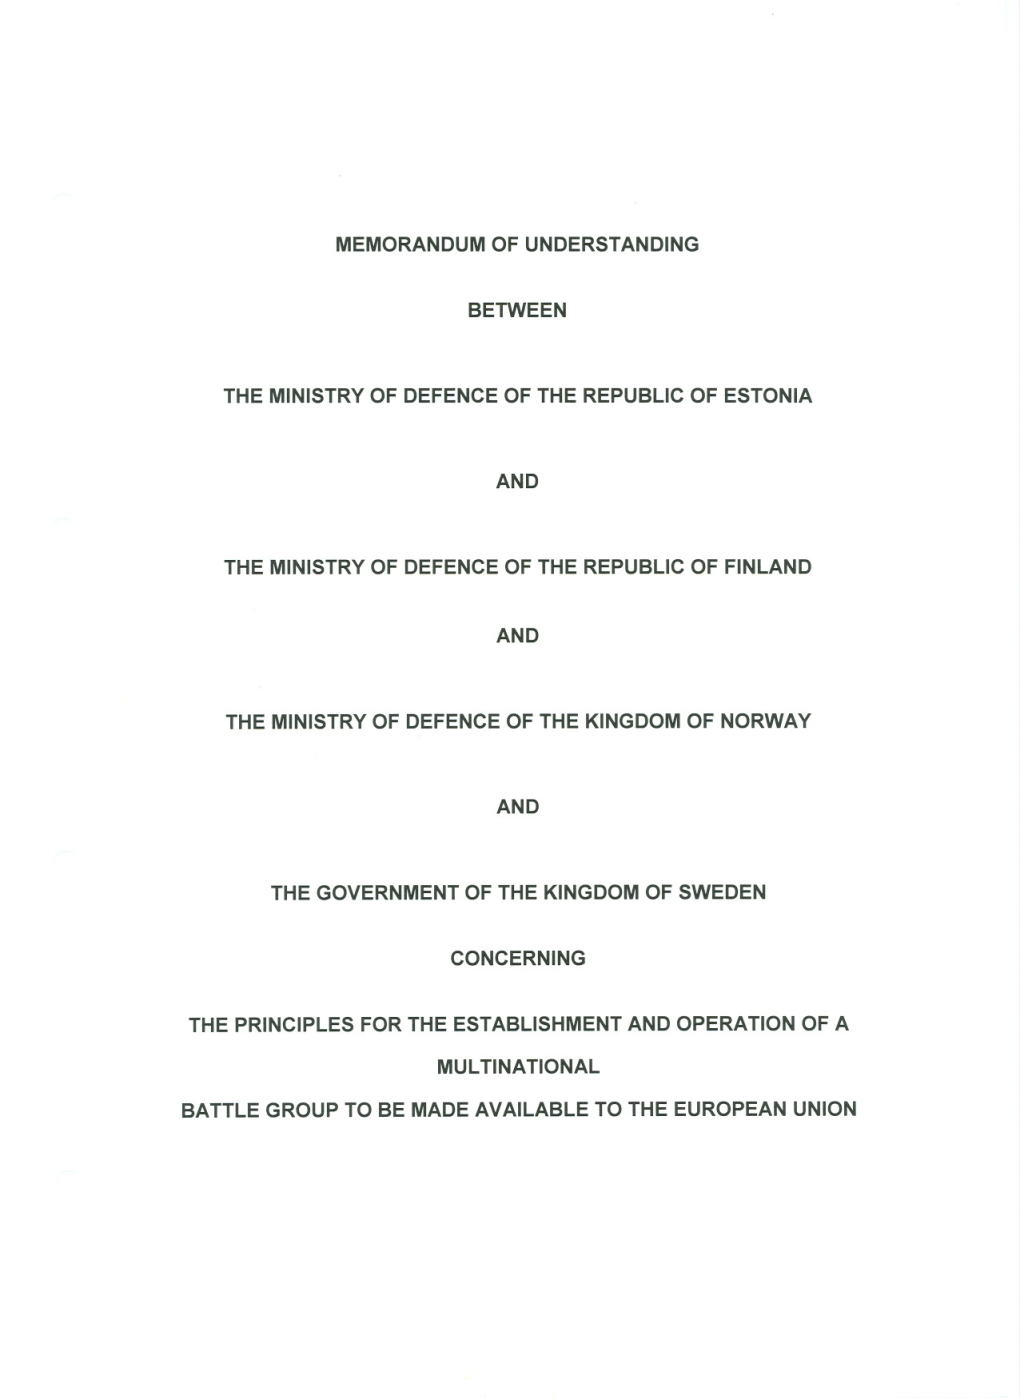 Memorandum of Understanding the Ministry of Defence of the Republic of Estonia and the Ministry of Defence of the Republic of Fi